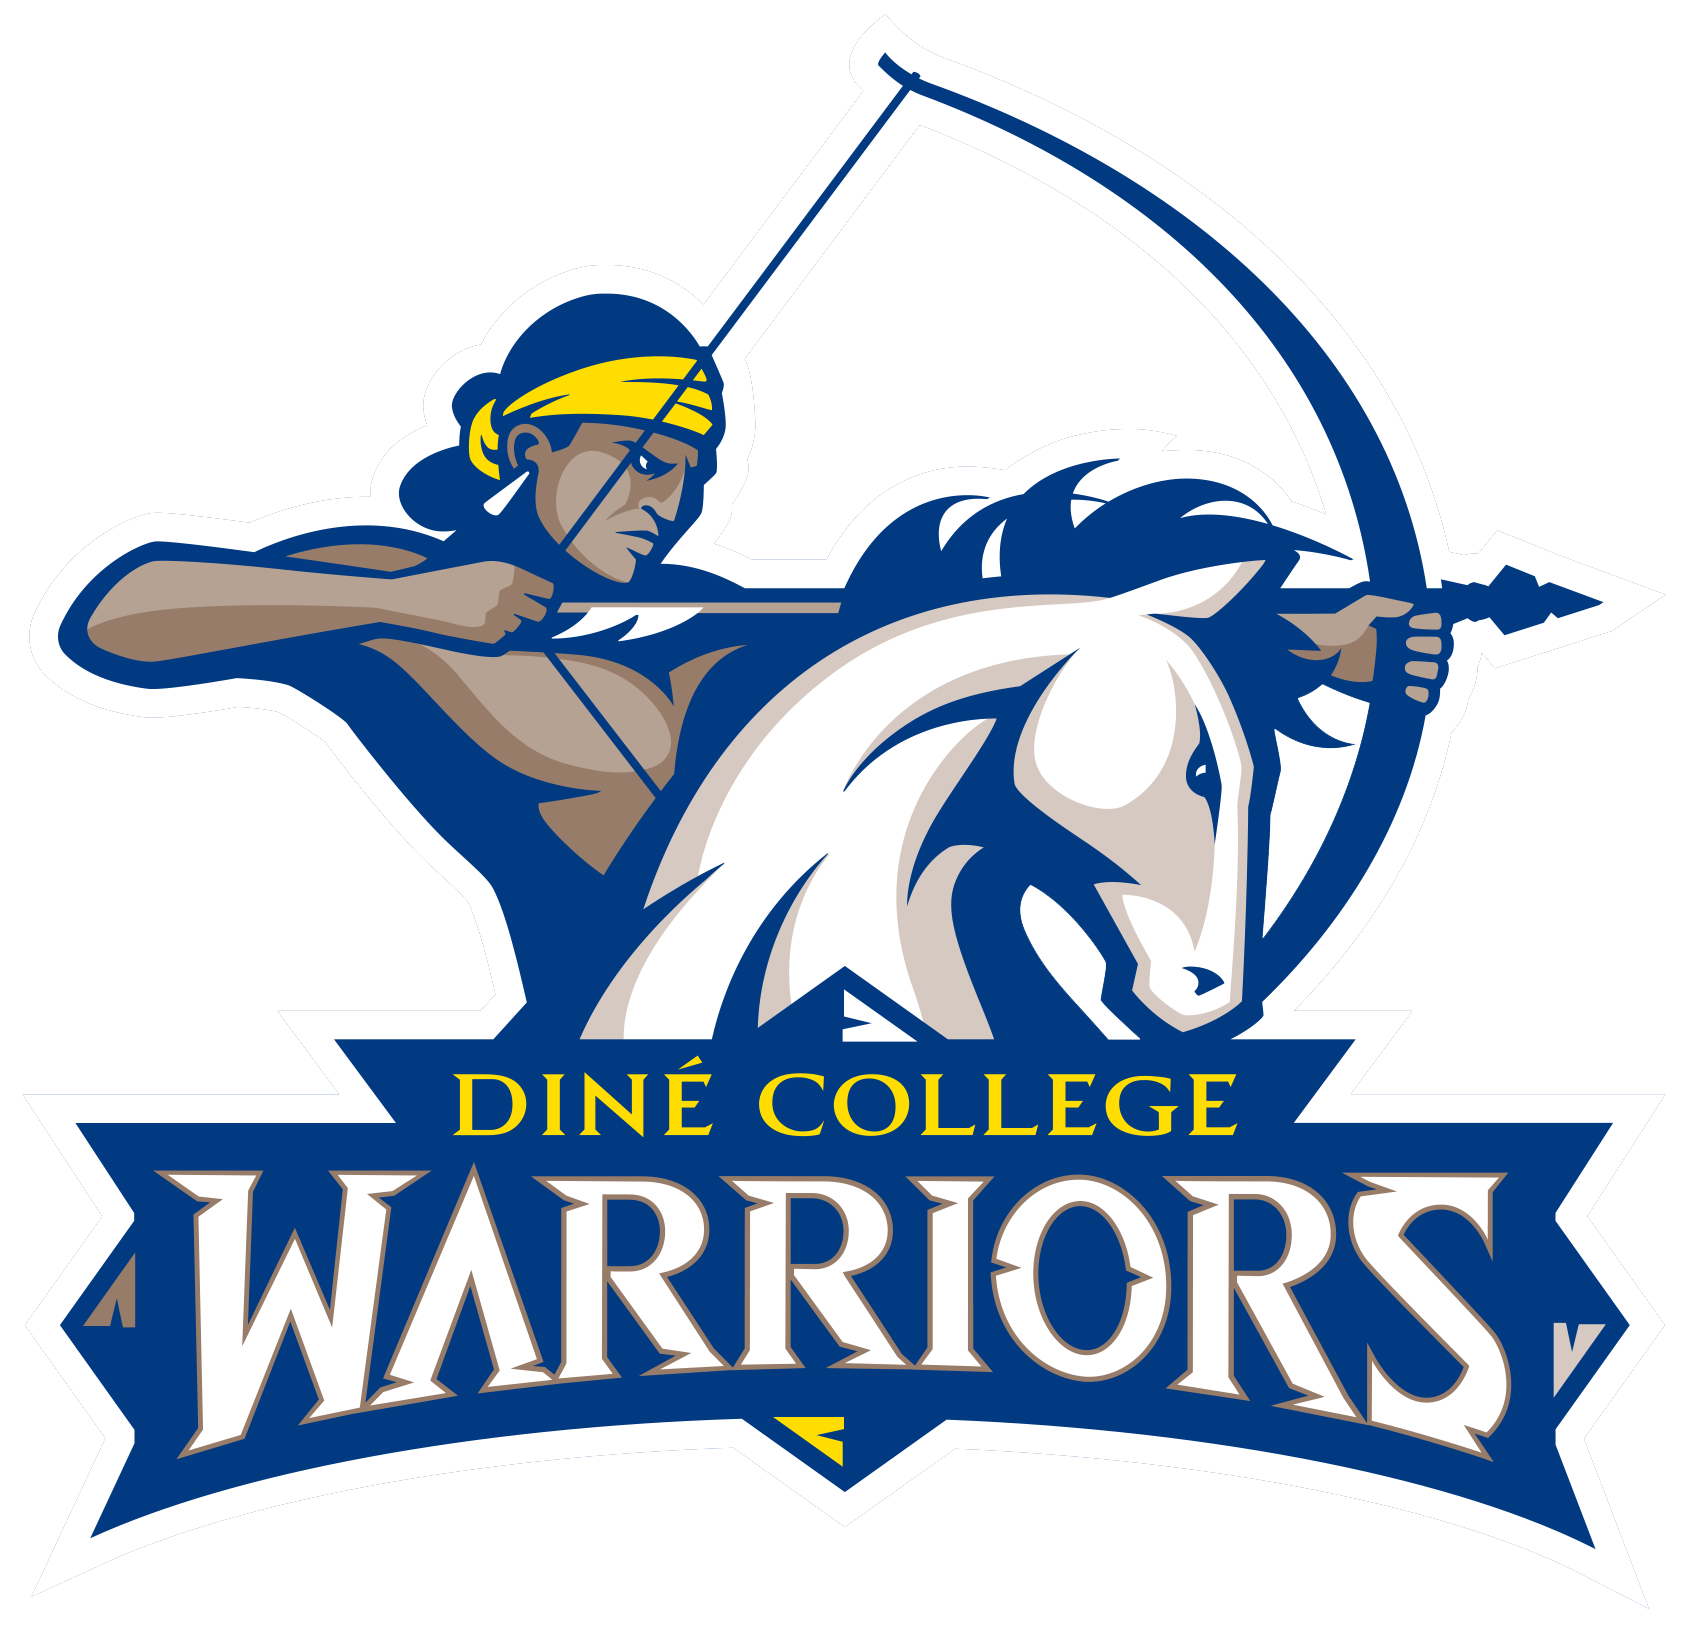 Meet our Faculty - Diné College